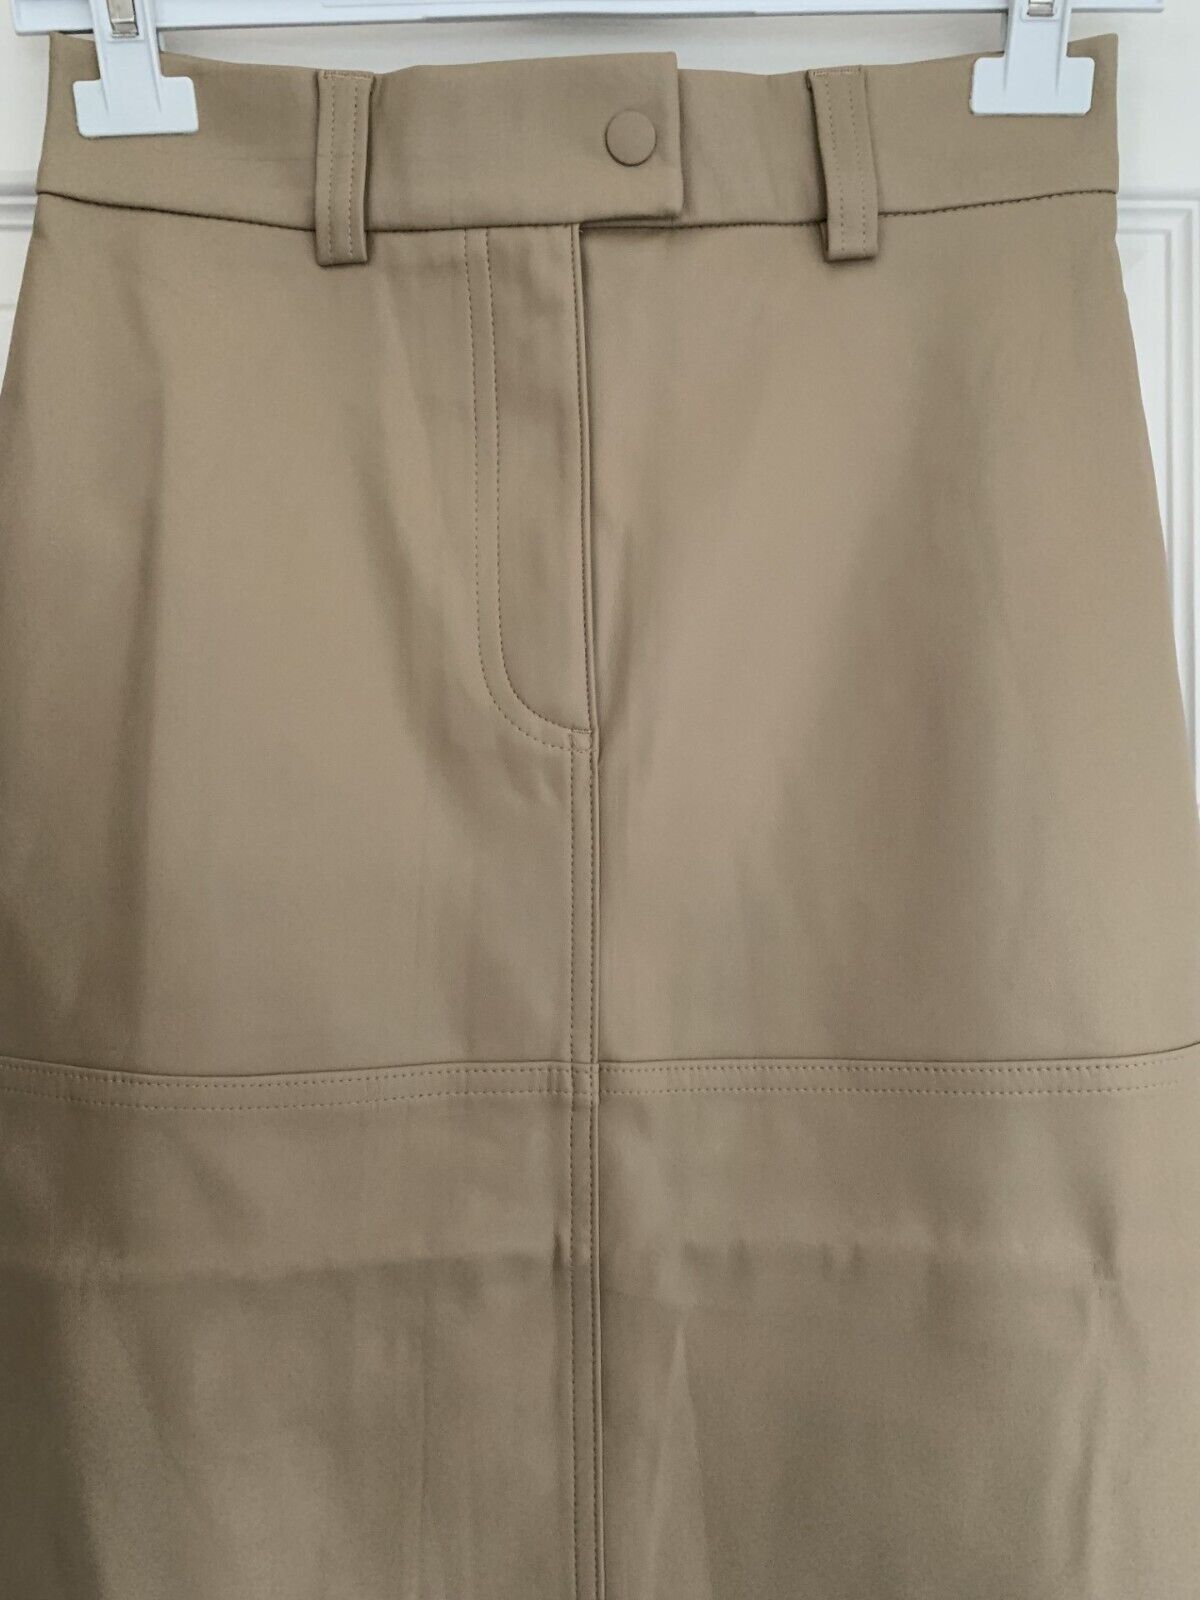 EX M*S Beige Unlined Faux Leather A-Line Skirt Sizes 6 8 10 12 14 16 20 RRP £35